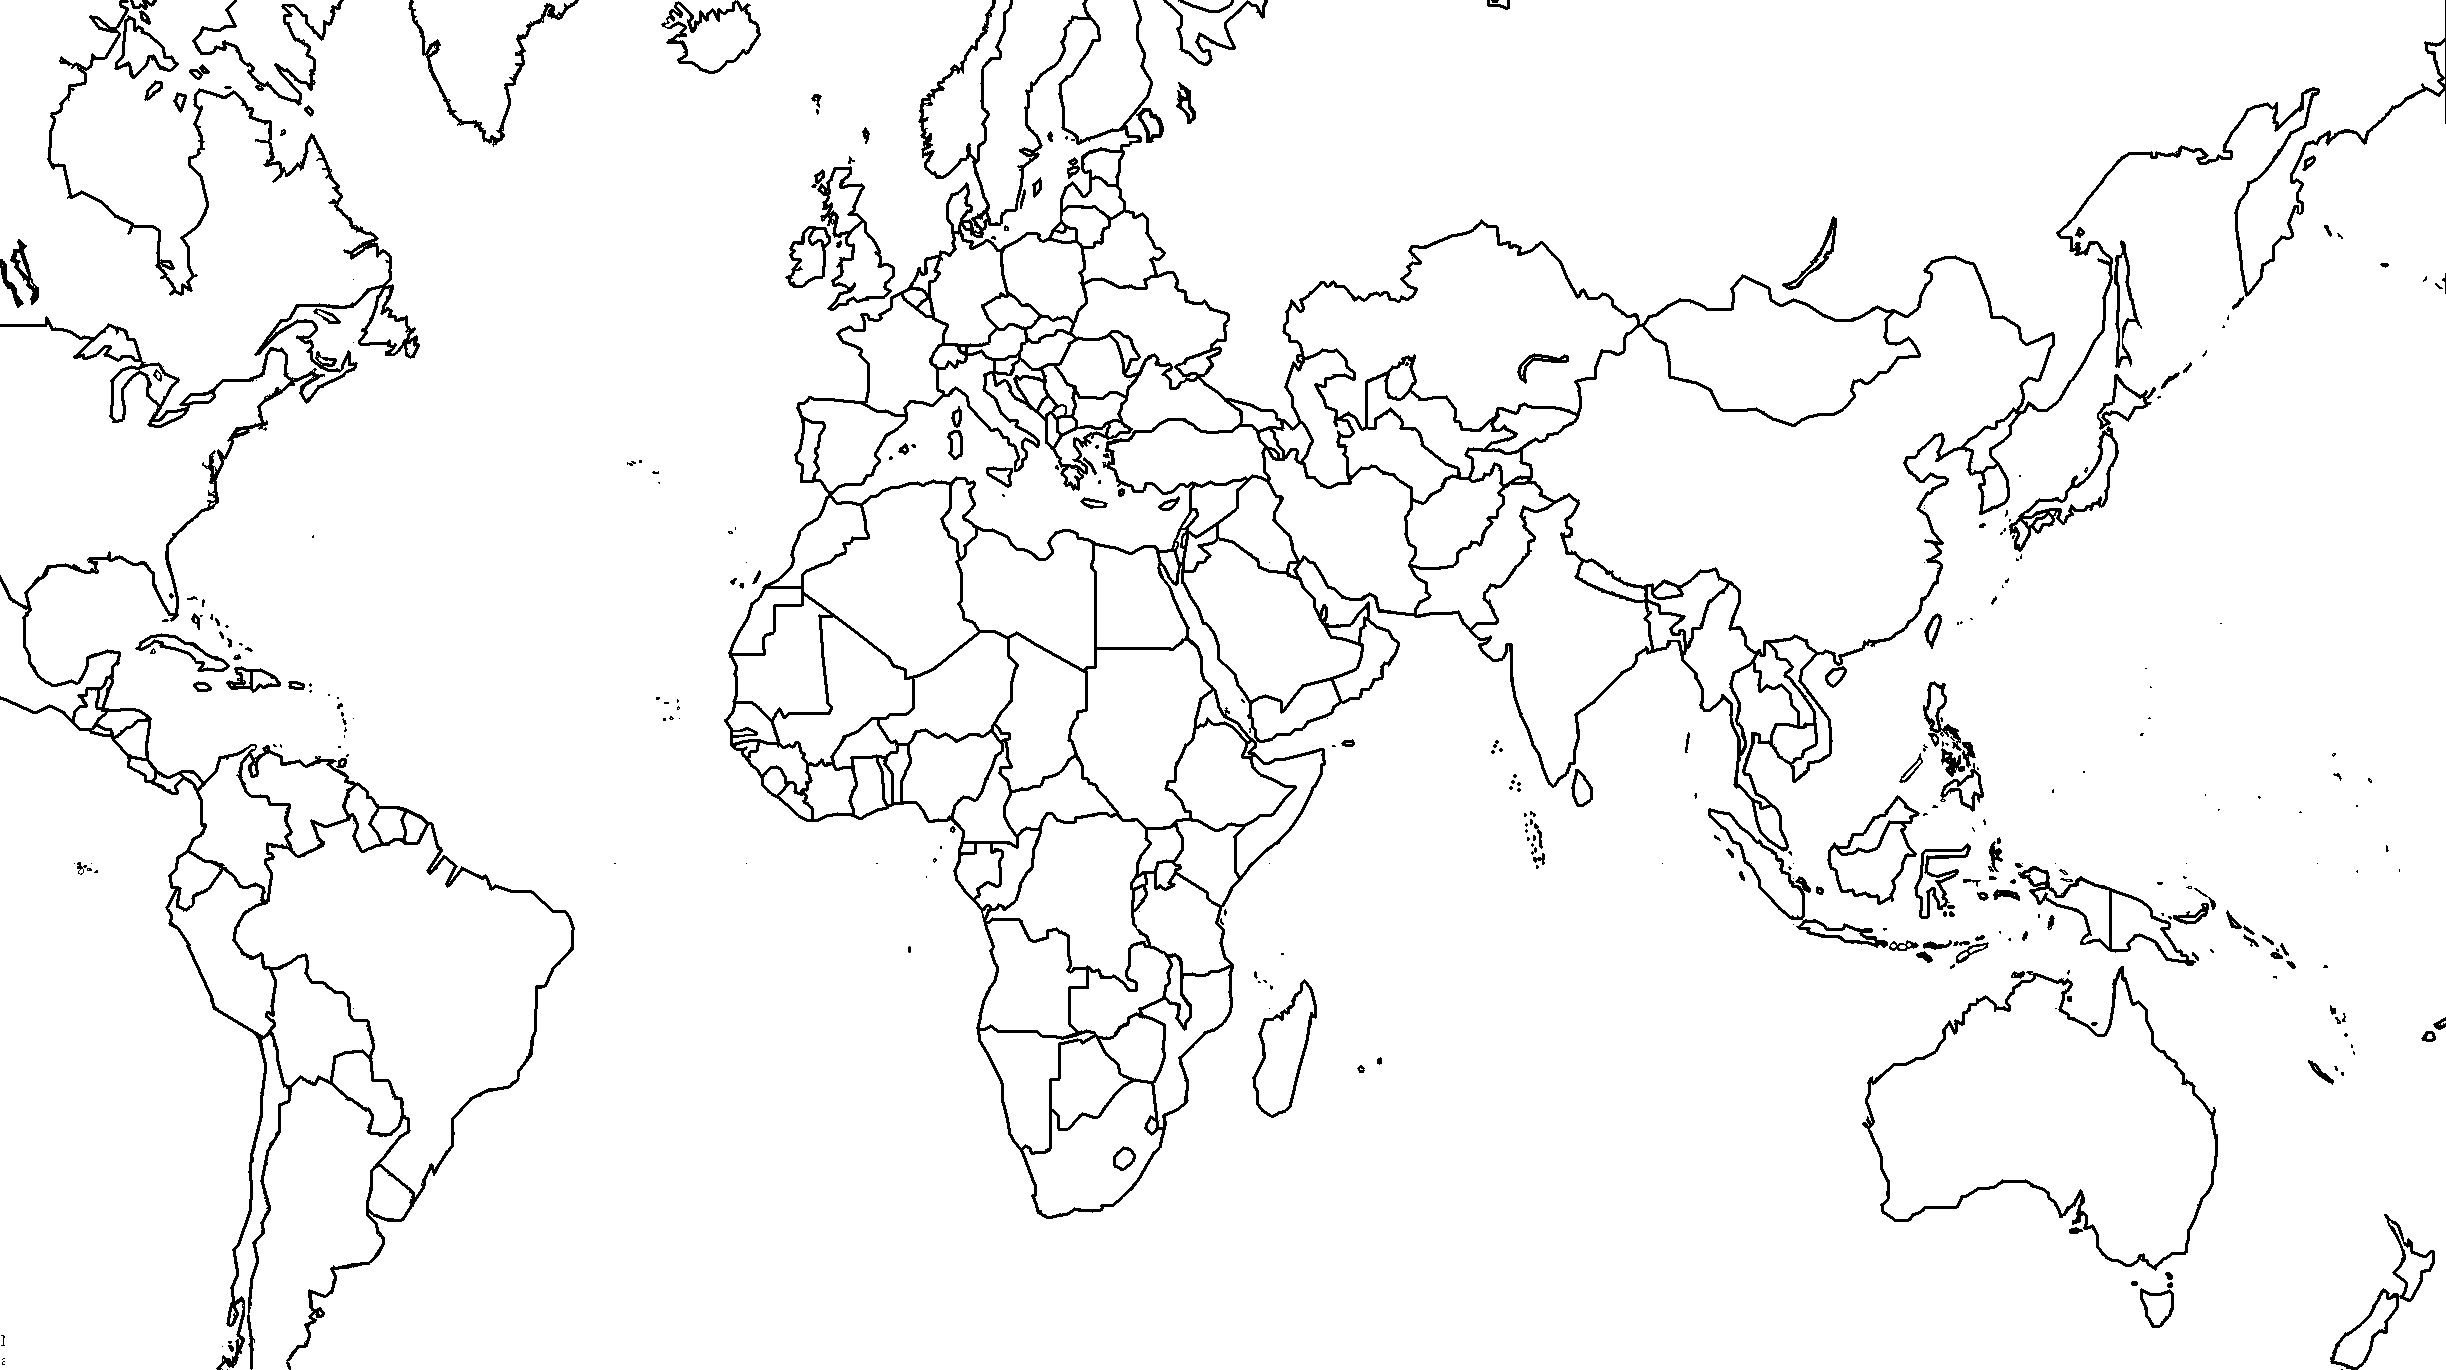 Free Printable Political Detailed World Map in PDF | World ...